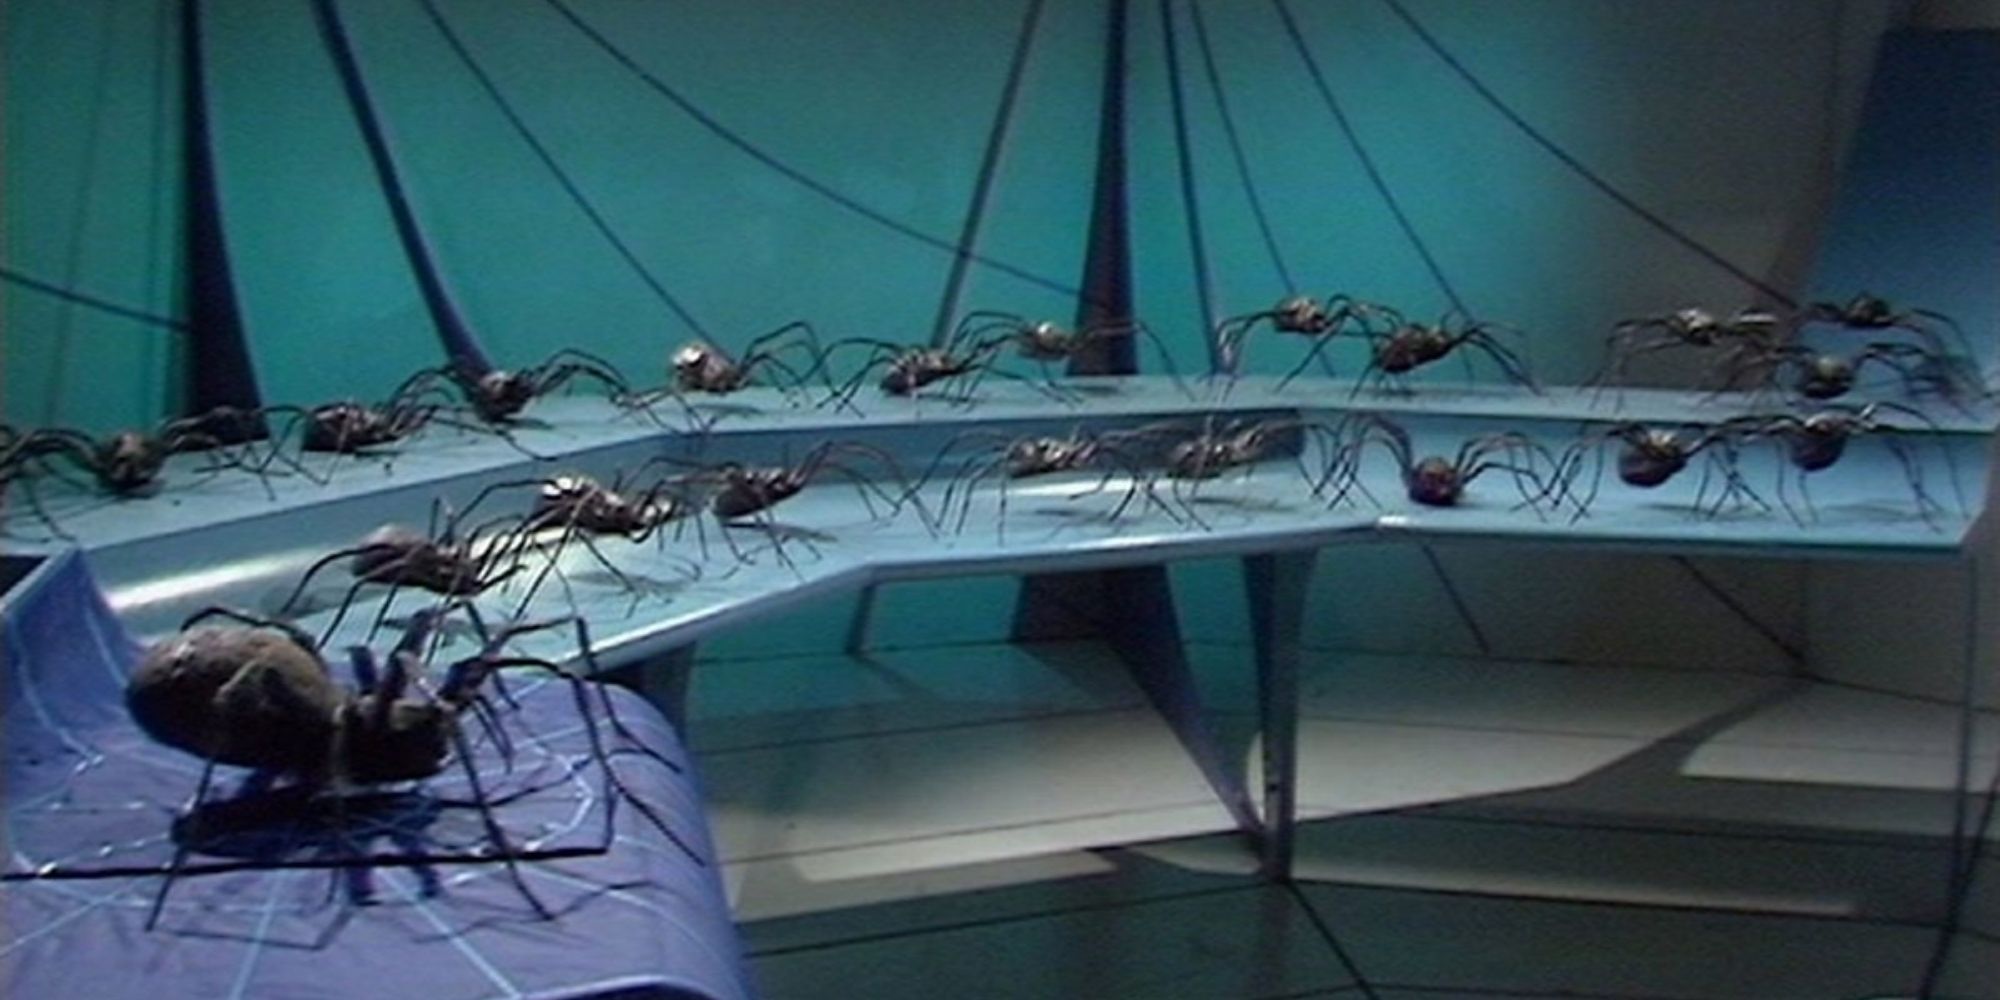 Still of the serial Planet of the Spiders from the TV show Doctor Who.